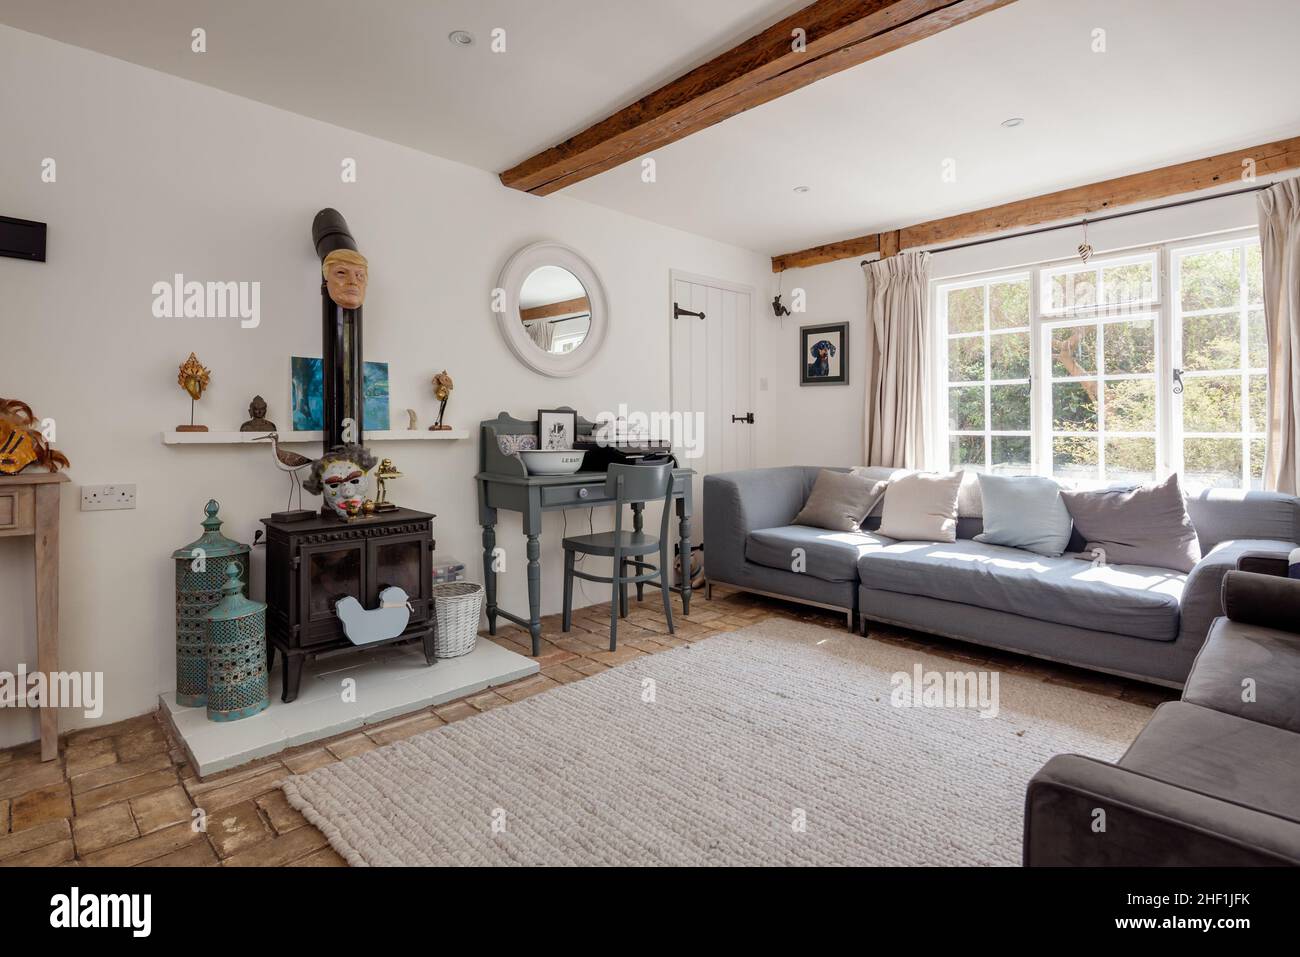 Chilton Street, Suffolk - 20 April 2018: Traditional style farmhouse cottage living room dressed in a sympathetic chic and fashional style with white Stock Photo